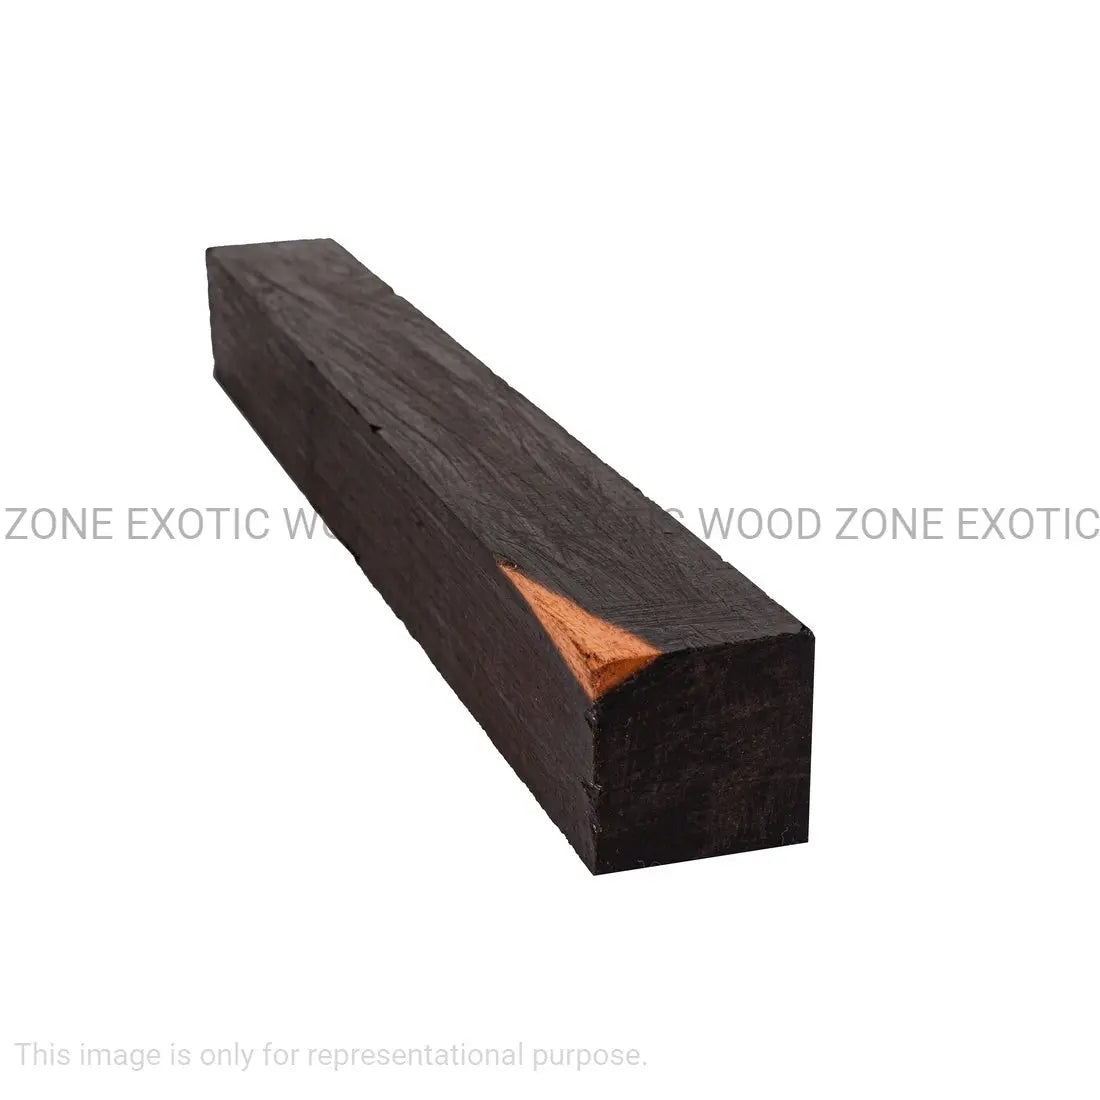 Katalox / Mexican Royal Ebony Turning Wood Blanks 1-1/2&quot; x 1-1/2&quot; x 24&quot; - Exotic Wood Zone - Buy online Across USA 